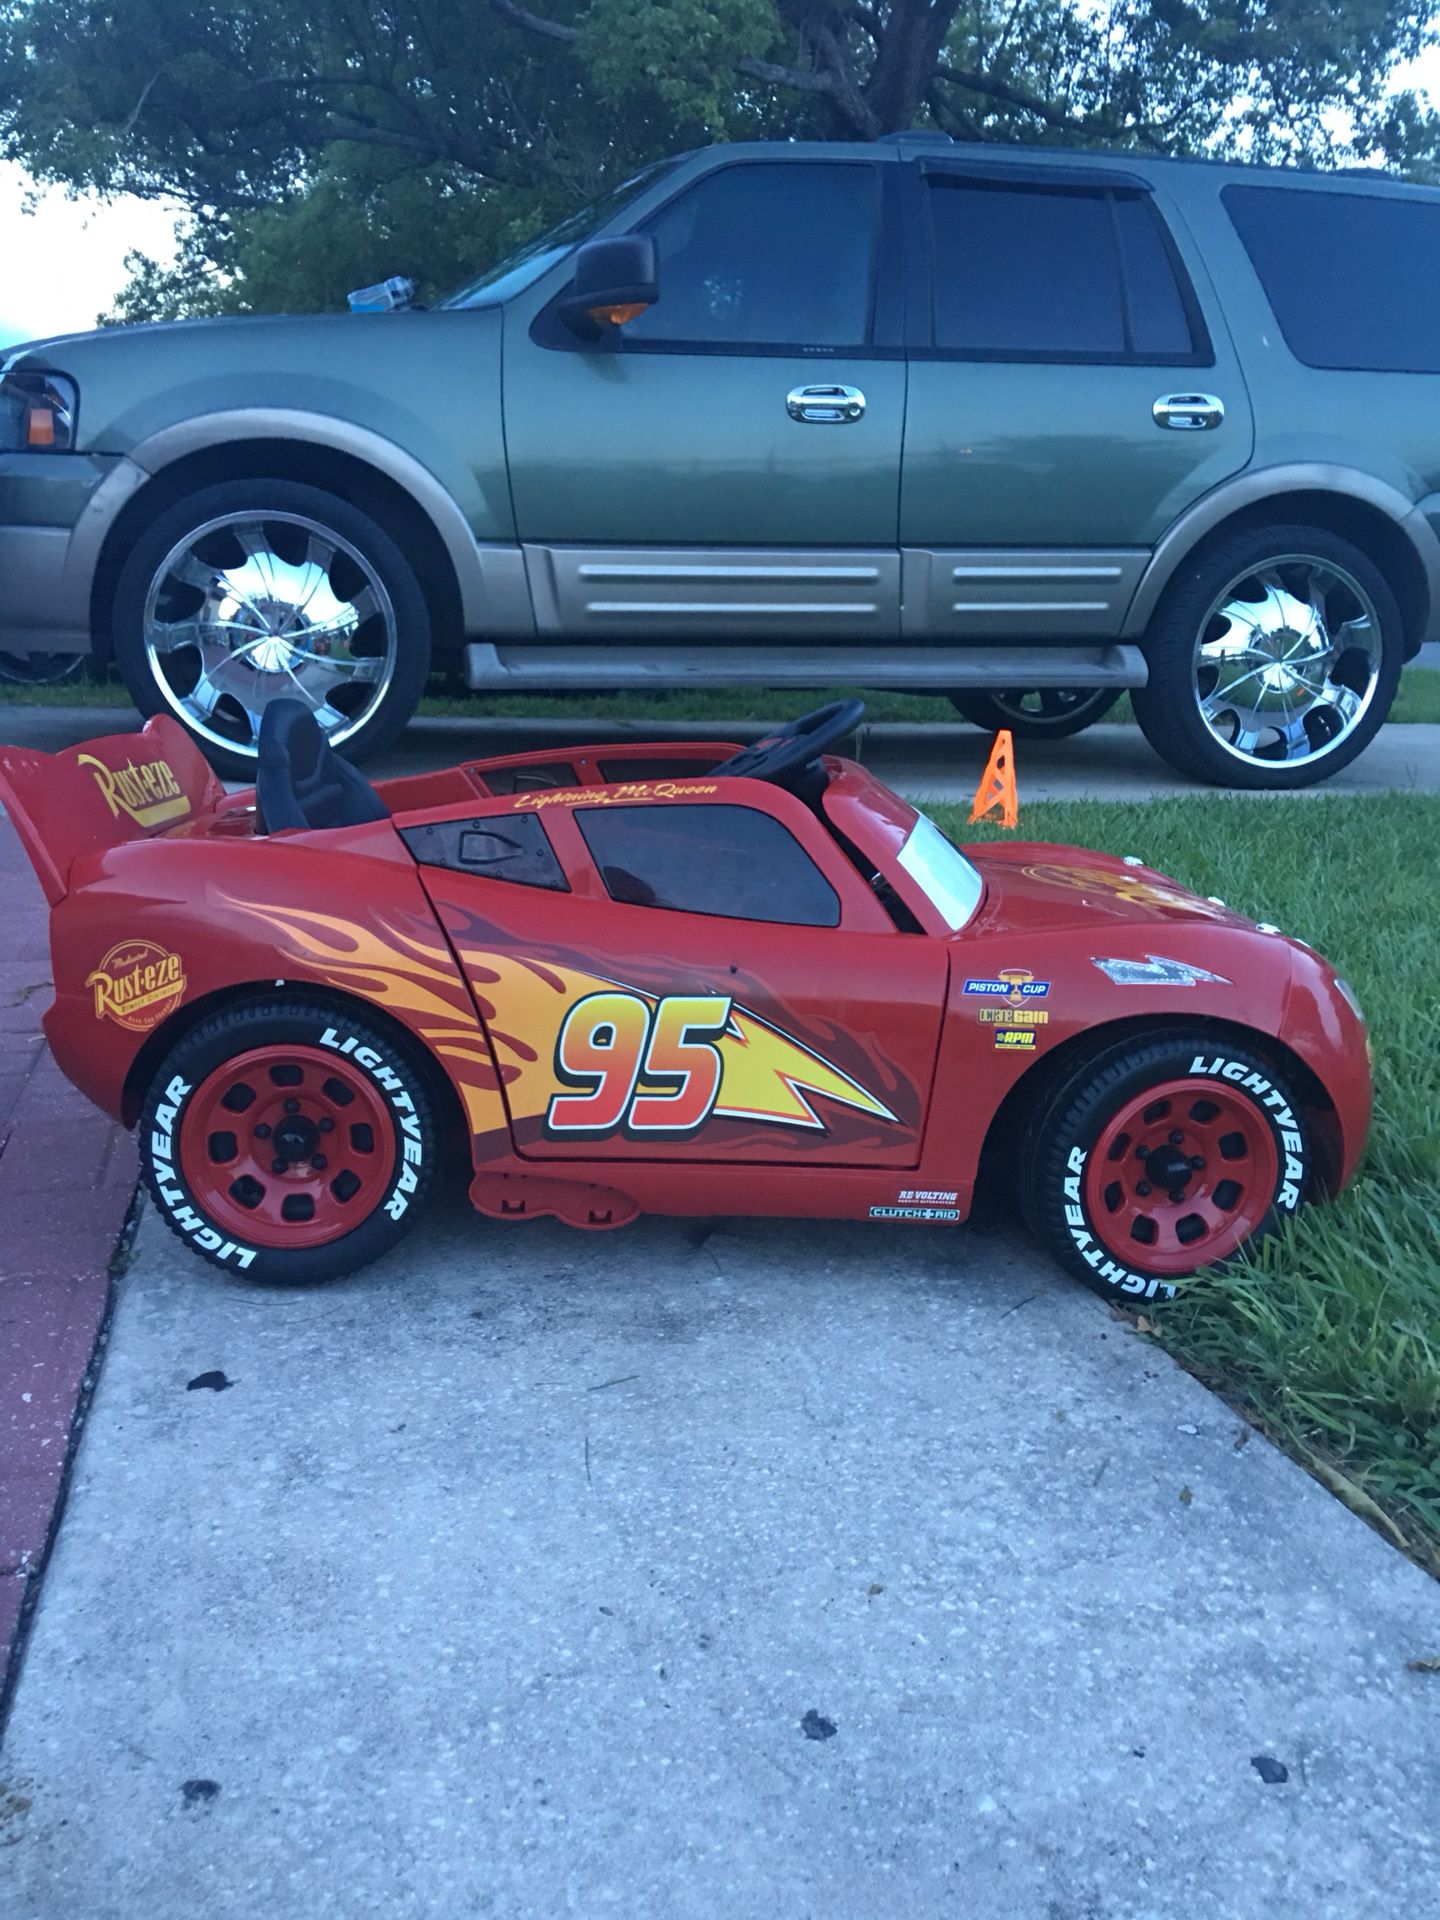 Selling the lighting McQueen in perfect condition still with battery charger selling it for $90